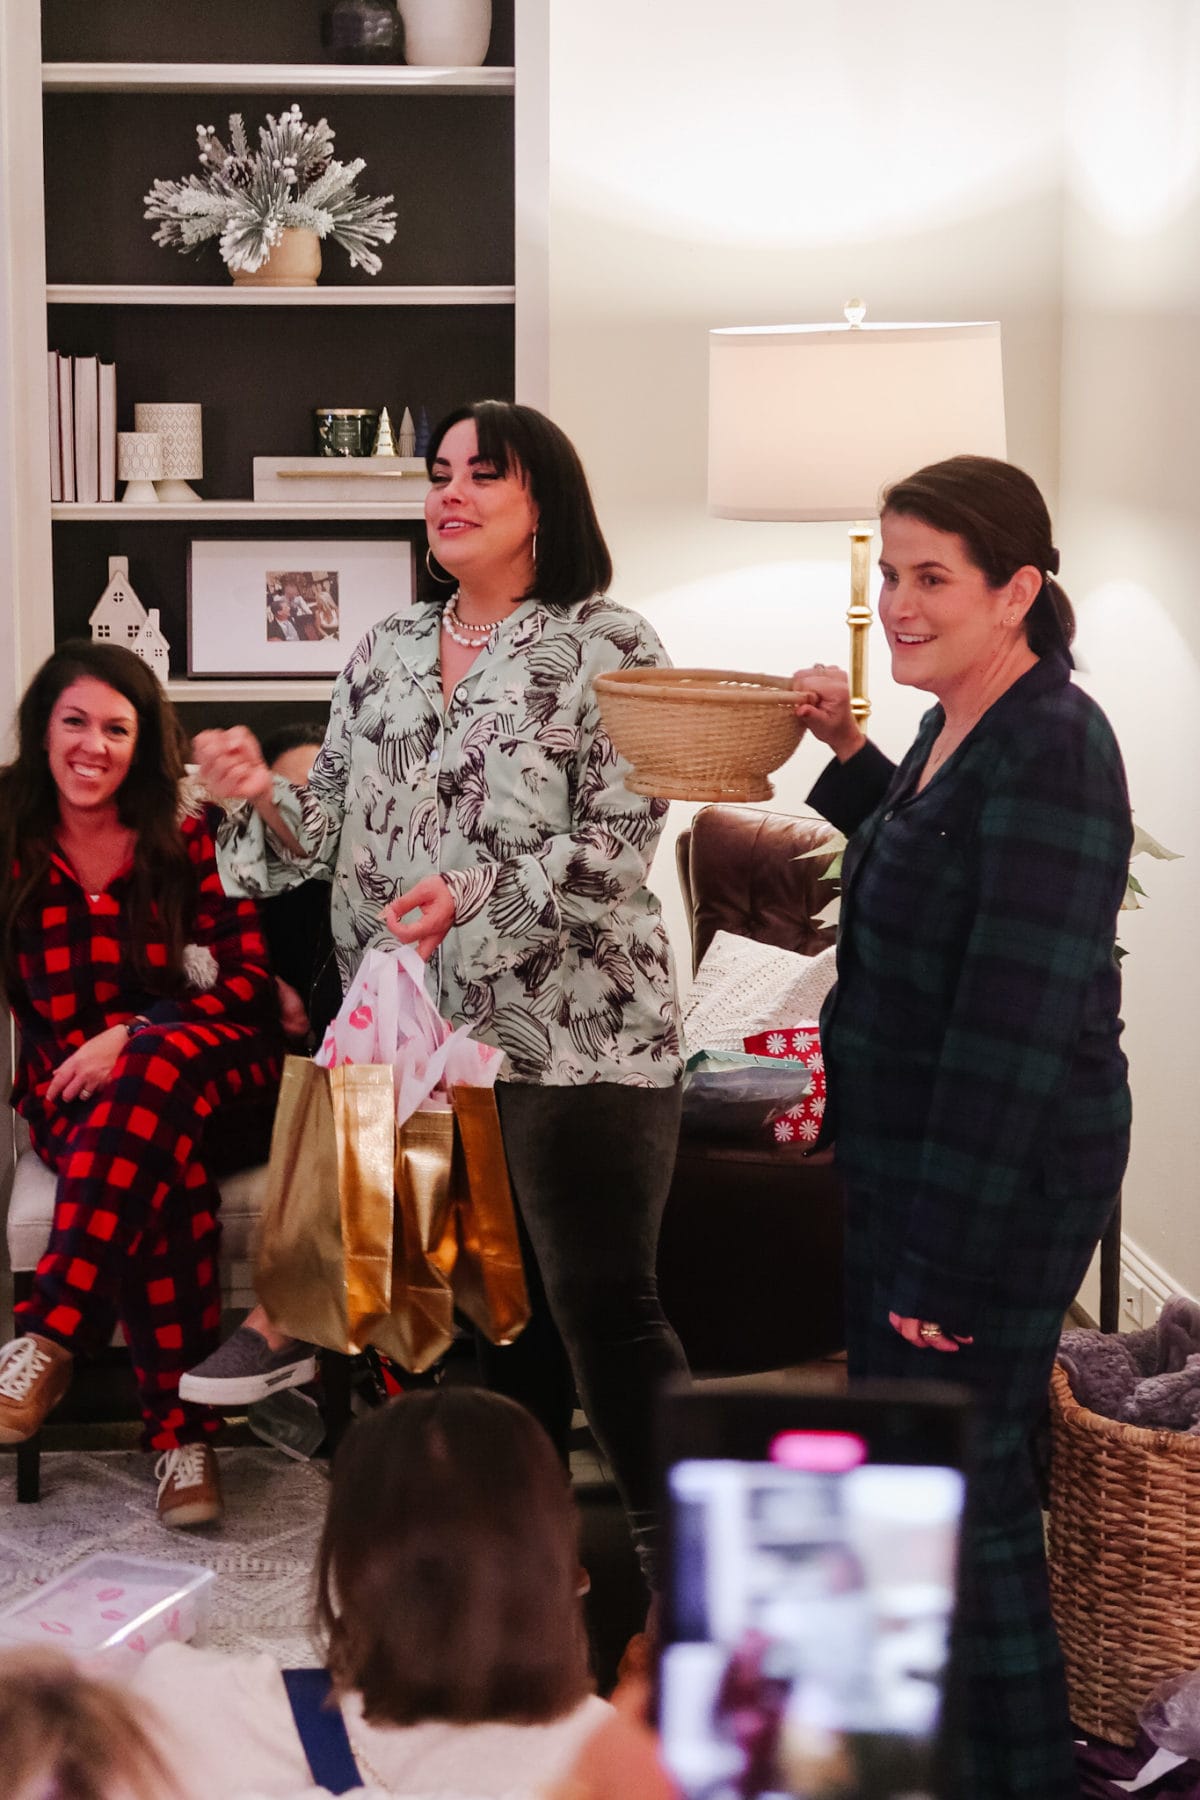 Our Favorite Things Party 2021 – Honey We're Home